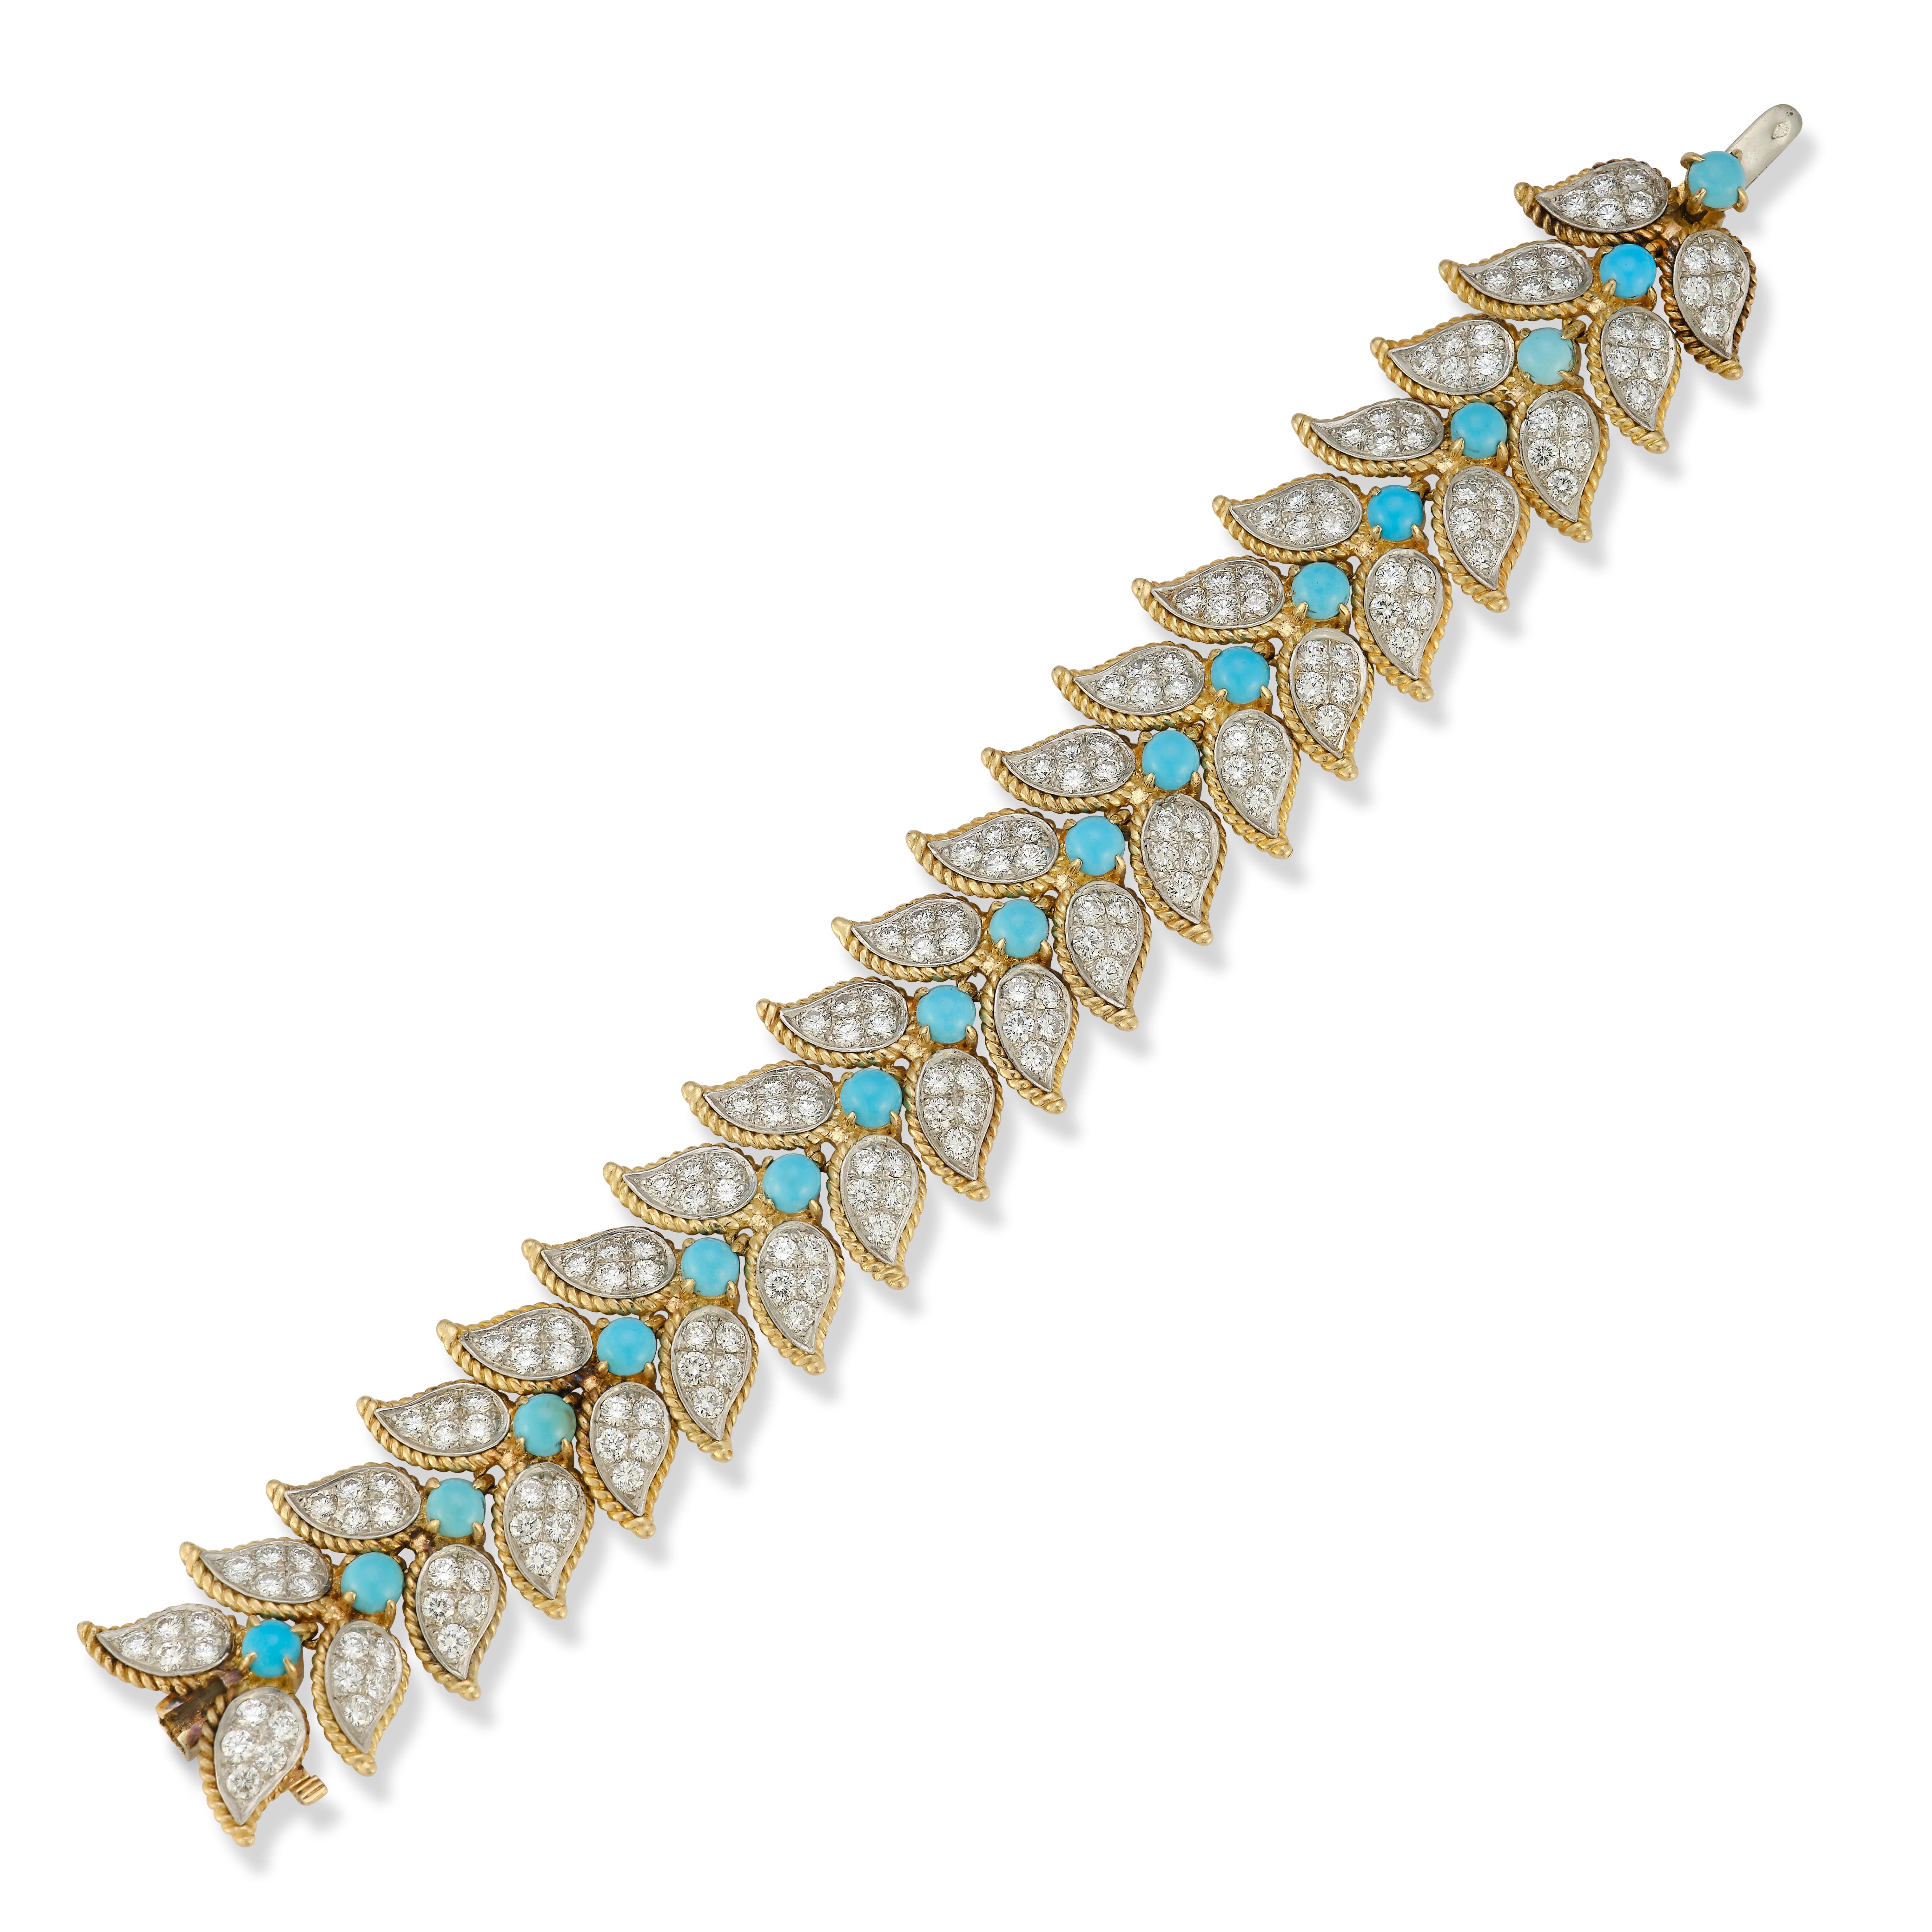 Van Cleef and Arpels Turquoise and Diamond Bracelet

 19 flower motif links set with diamonds, extending from a center cabochon turquoise set in platinum & 18k yellow gold.

Measurements: 7.5